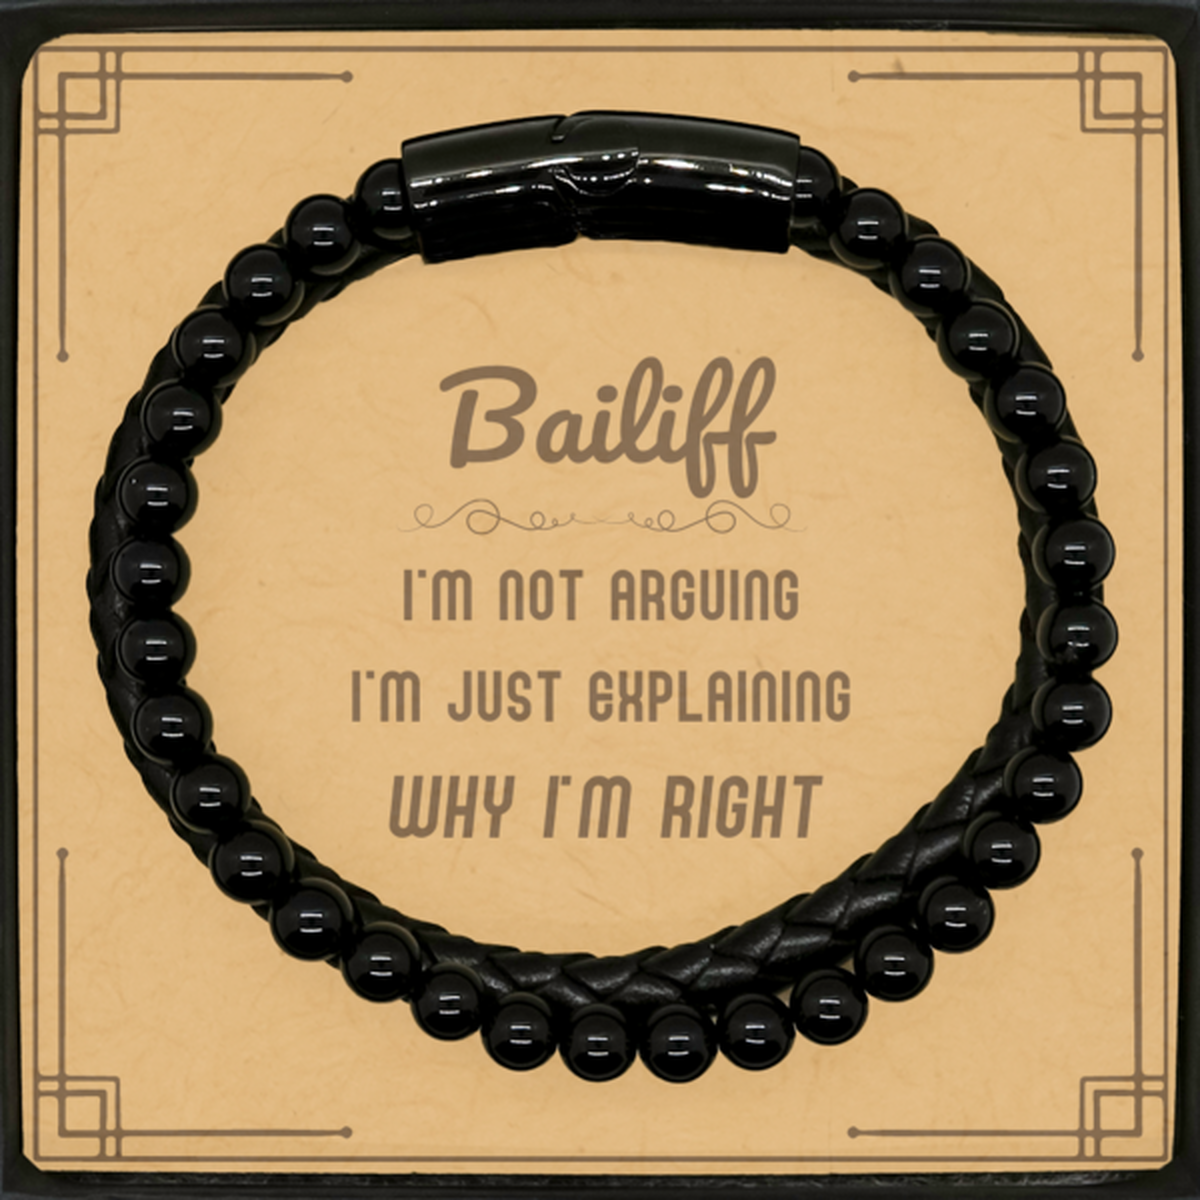 Bailiff I'm not Arguing. I'm Just Explaining Why I'm RIGHT Stone Leather Bracelets, Funny Saying Quote Bailiff Gifts For Bailiff Message Card Graduation Birthday Christmas Gifts for Men Women Coworker